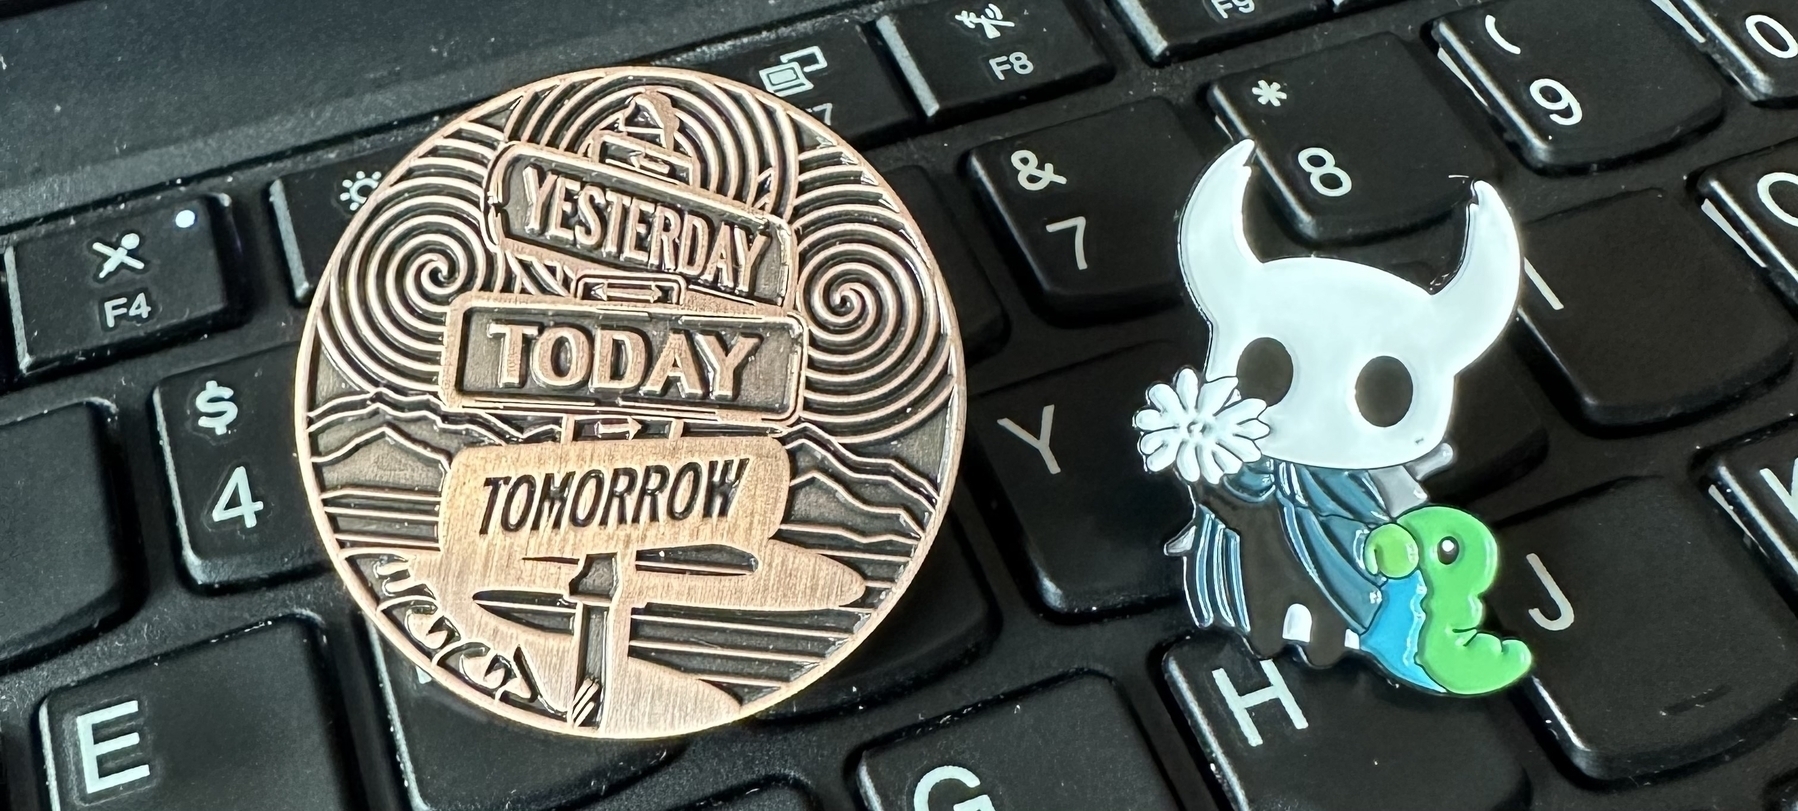 Circle eggy pin says “yesterday today tomorrow” and hollow knight pin holding white flower and grub. 